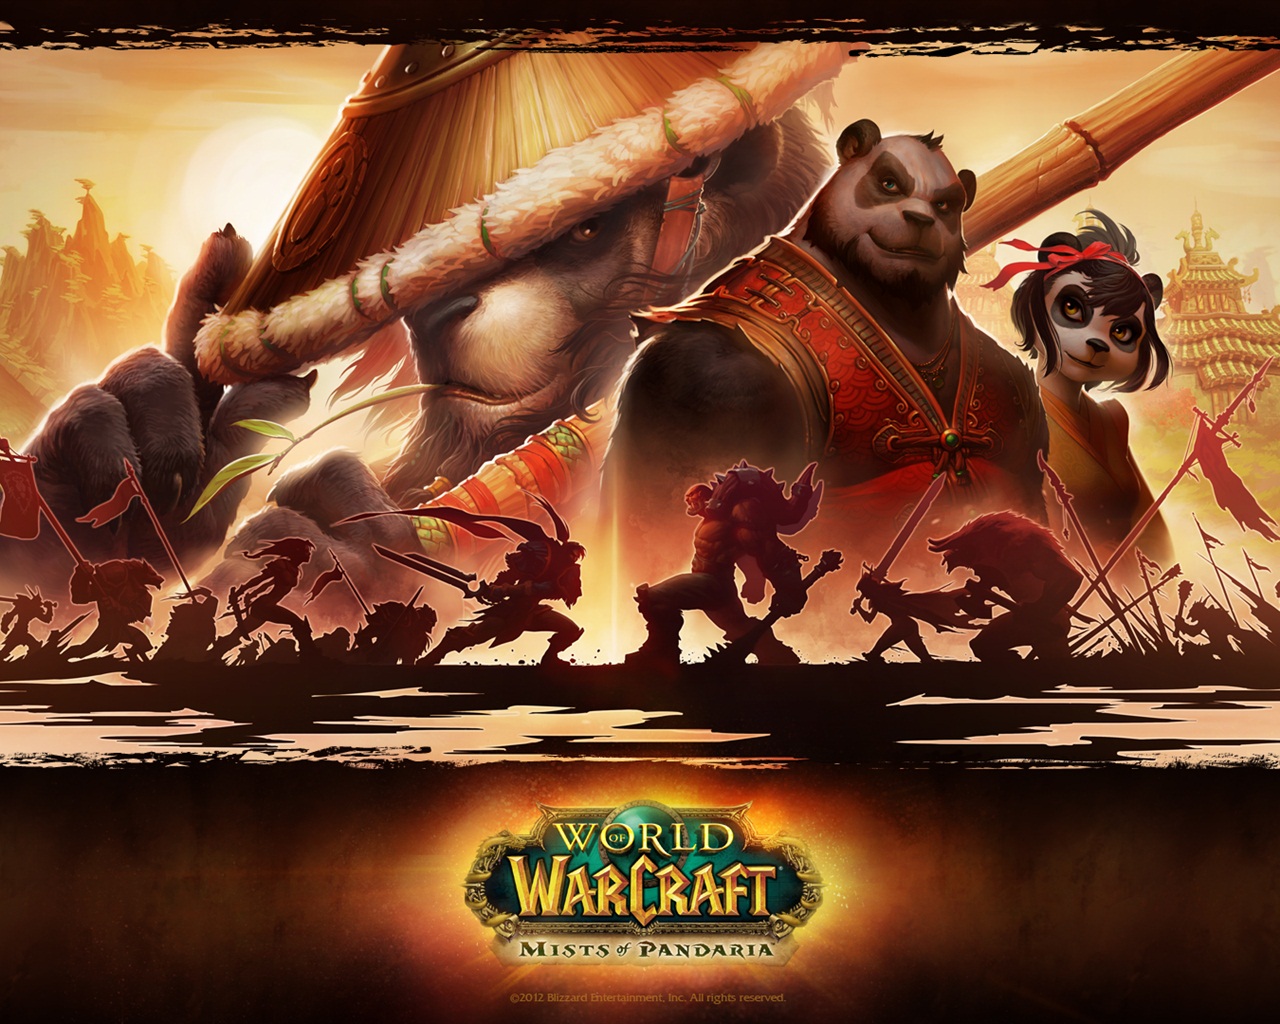 World of Warcraft: Mists of Pandaria HD wallpapers #7 - 1280x1024